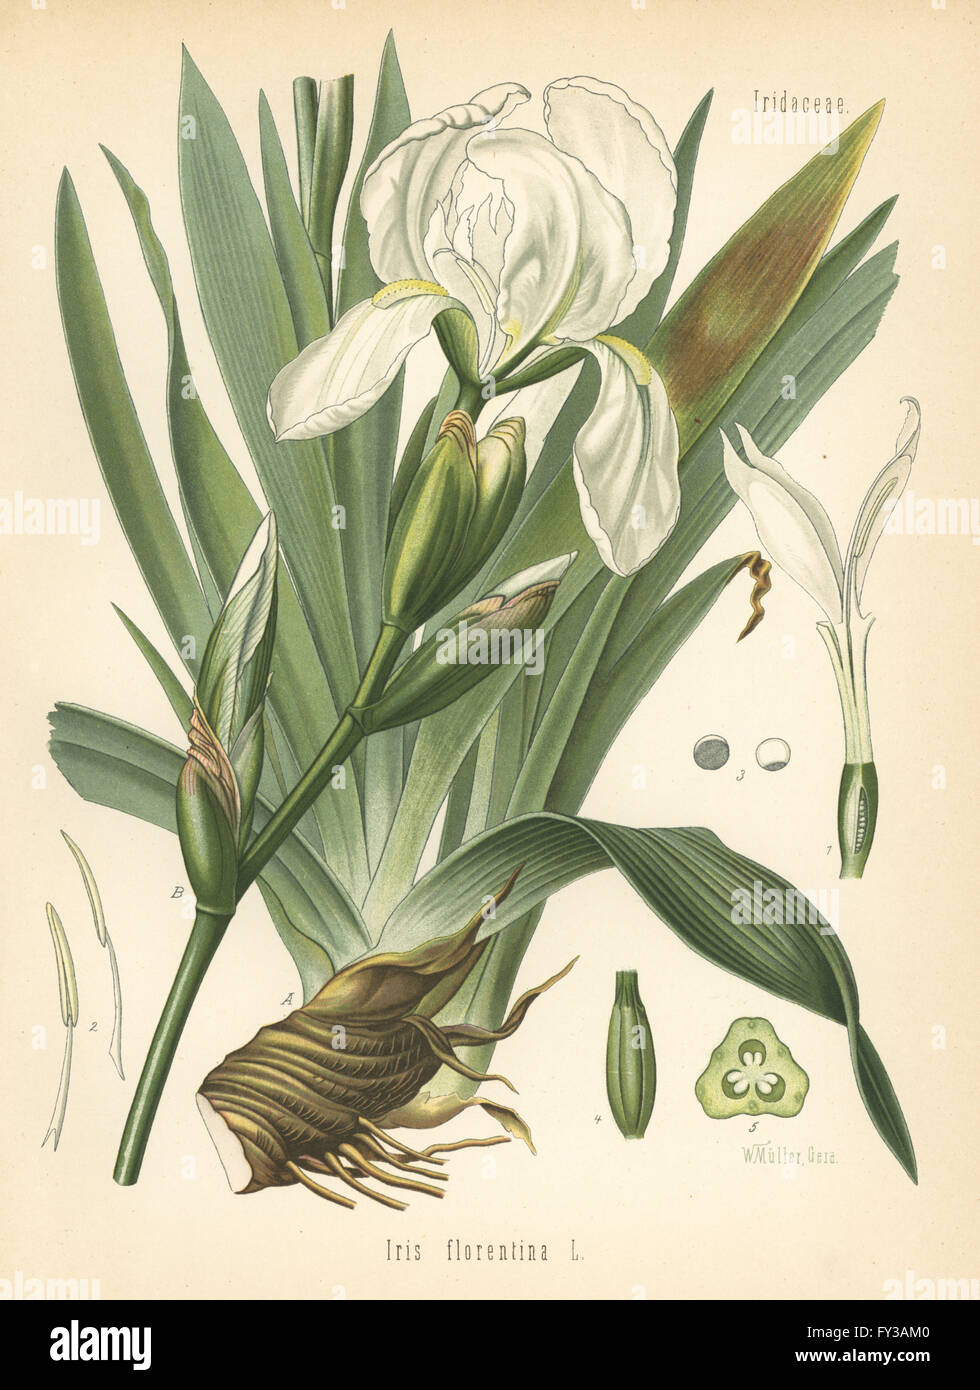 White flag, Iris germanica (Iris florentina). Chromolithograph after a botanical illustration by Walther Muller from Hermann Adolph Koehler's Medicinal Plants, edited by Gustav Pabst, Koehler, Germany, 1887. Stock Photo